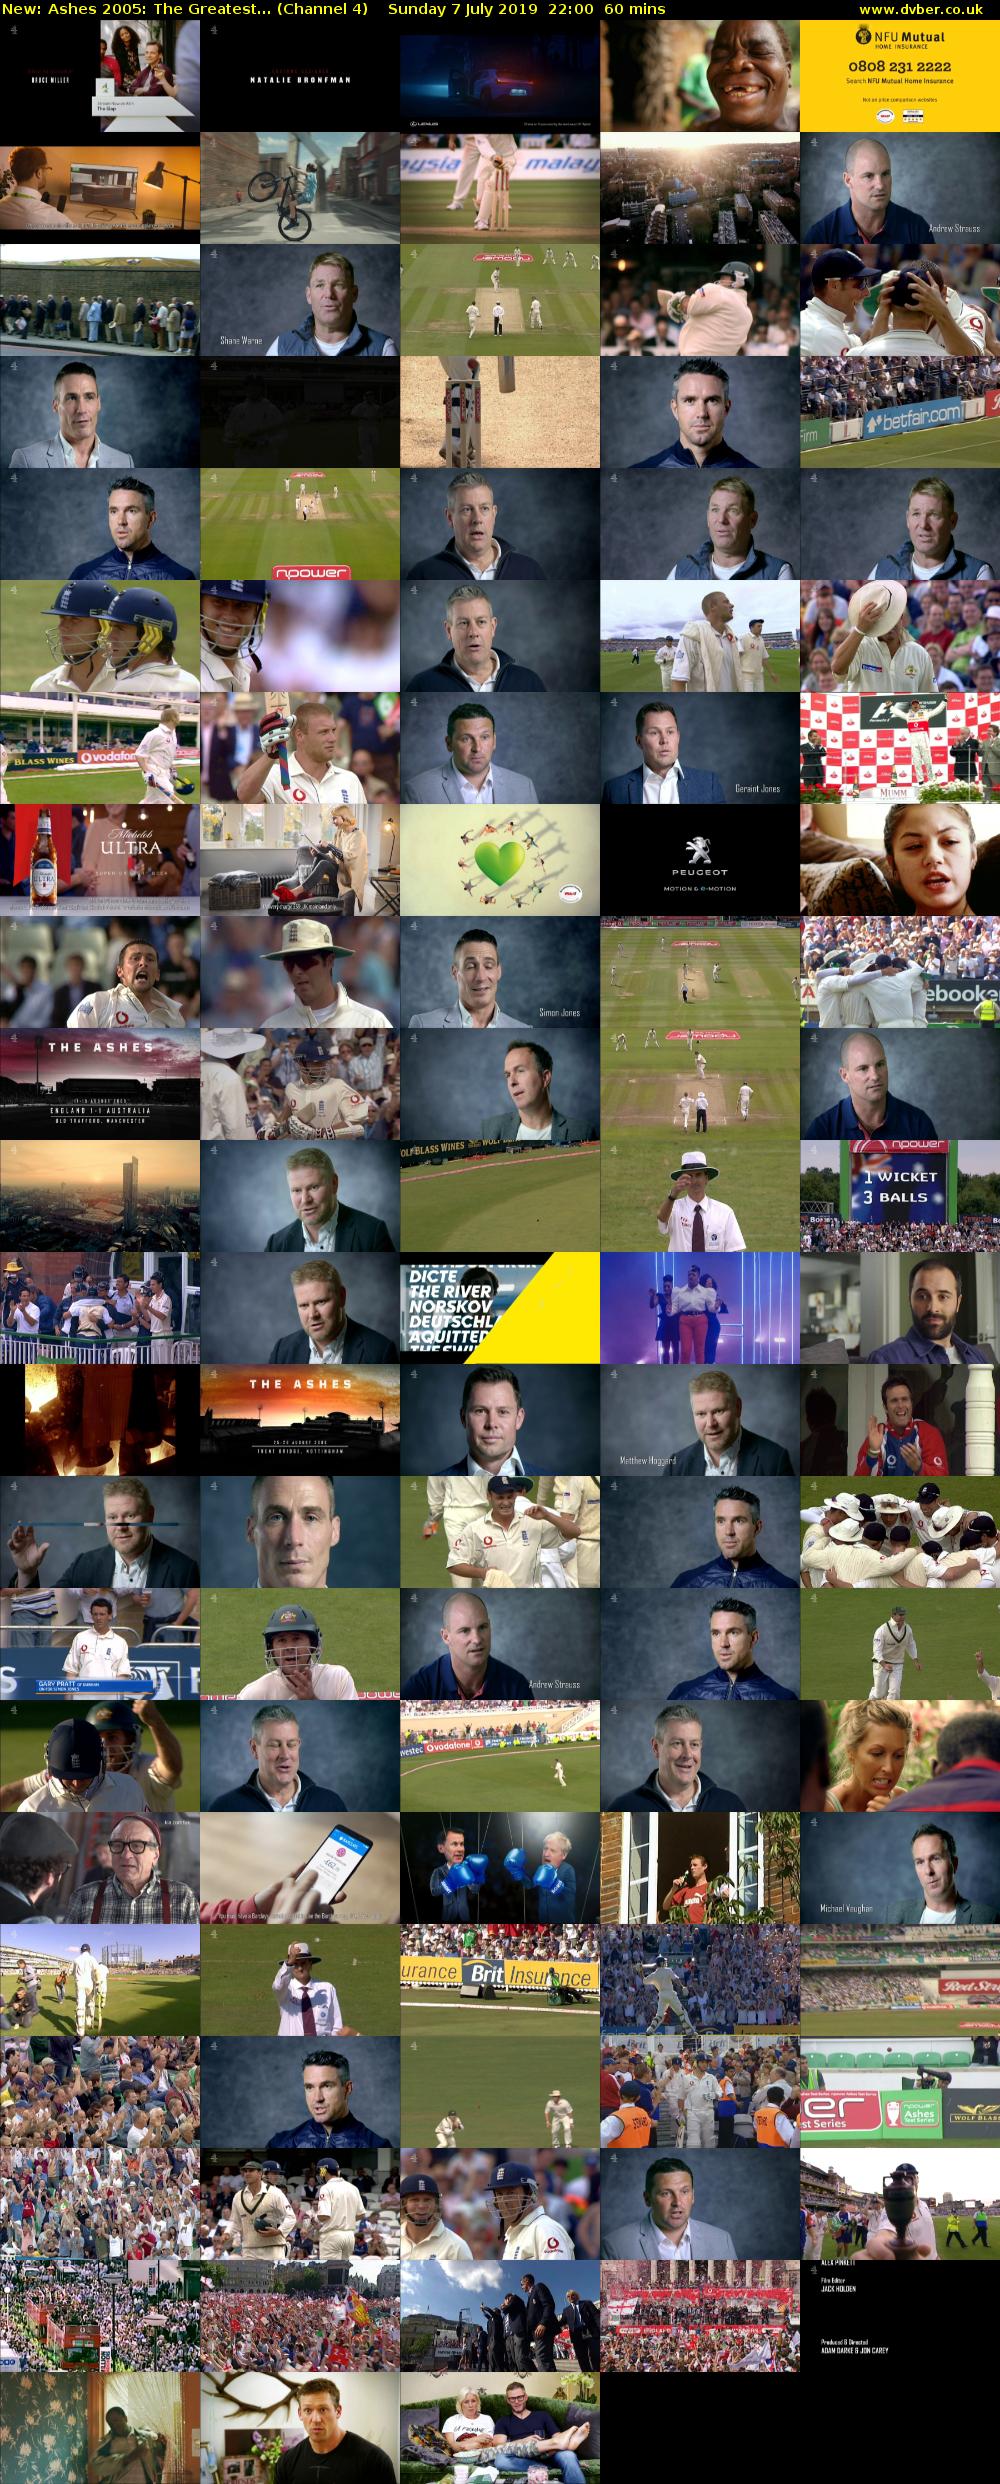 Ashes 2005: The Greatest... (Channel 4) Sunday 7 July 2019 22:00 - 23:00